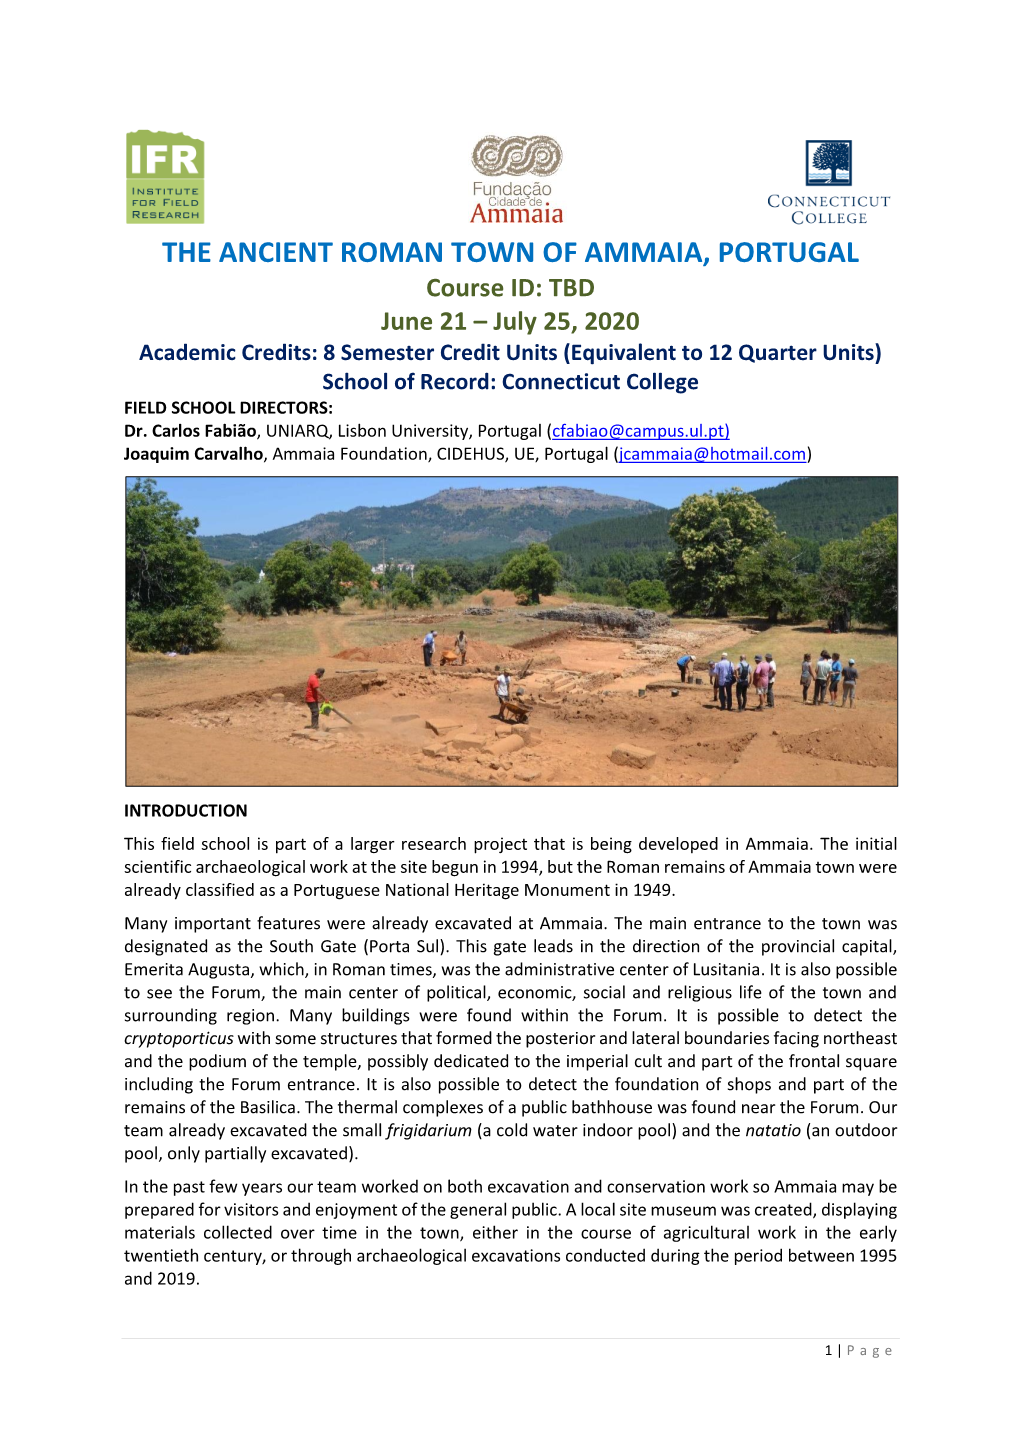 The Ancient Roman Town of Ammaia, Portugal